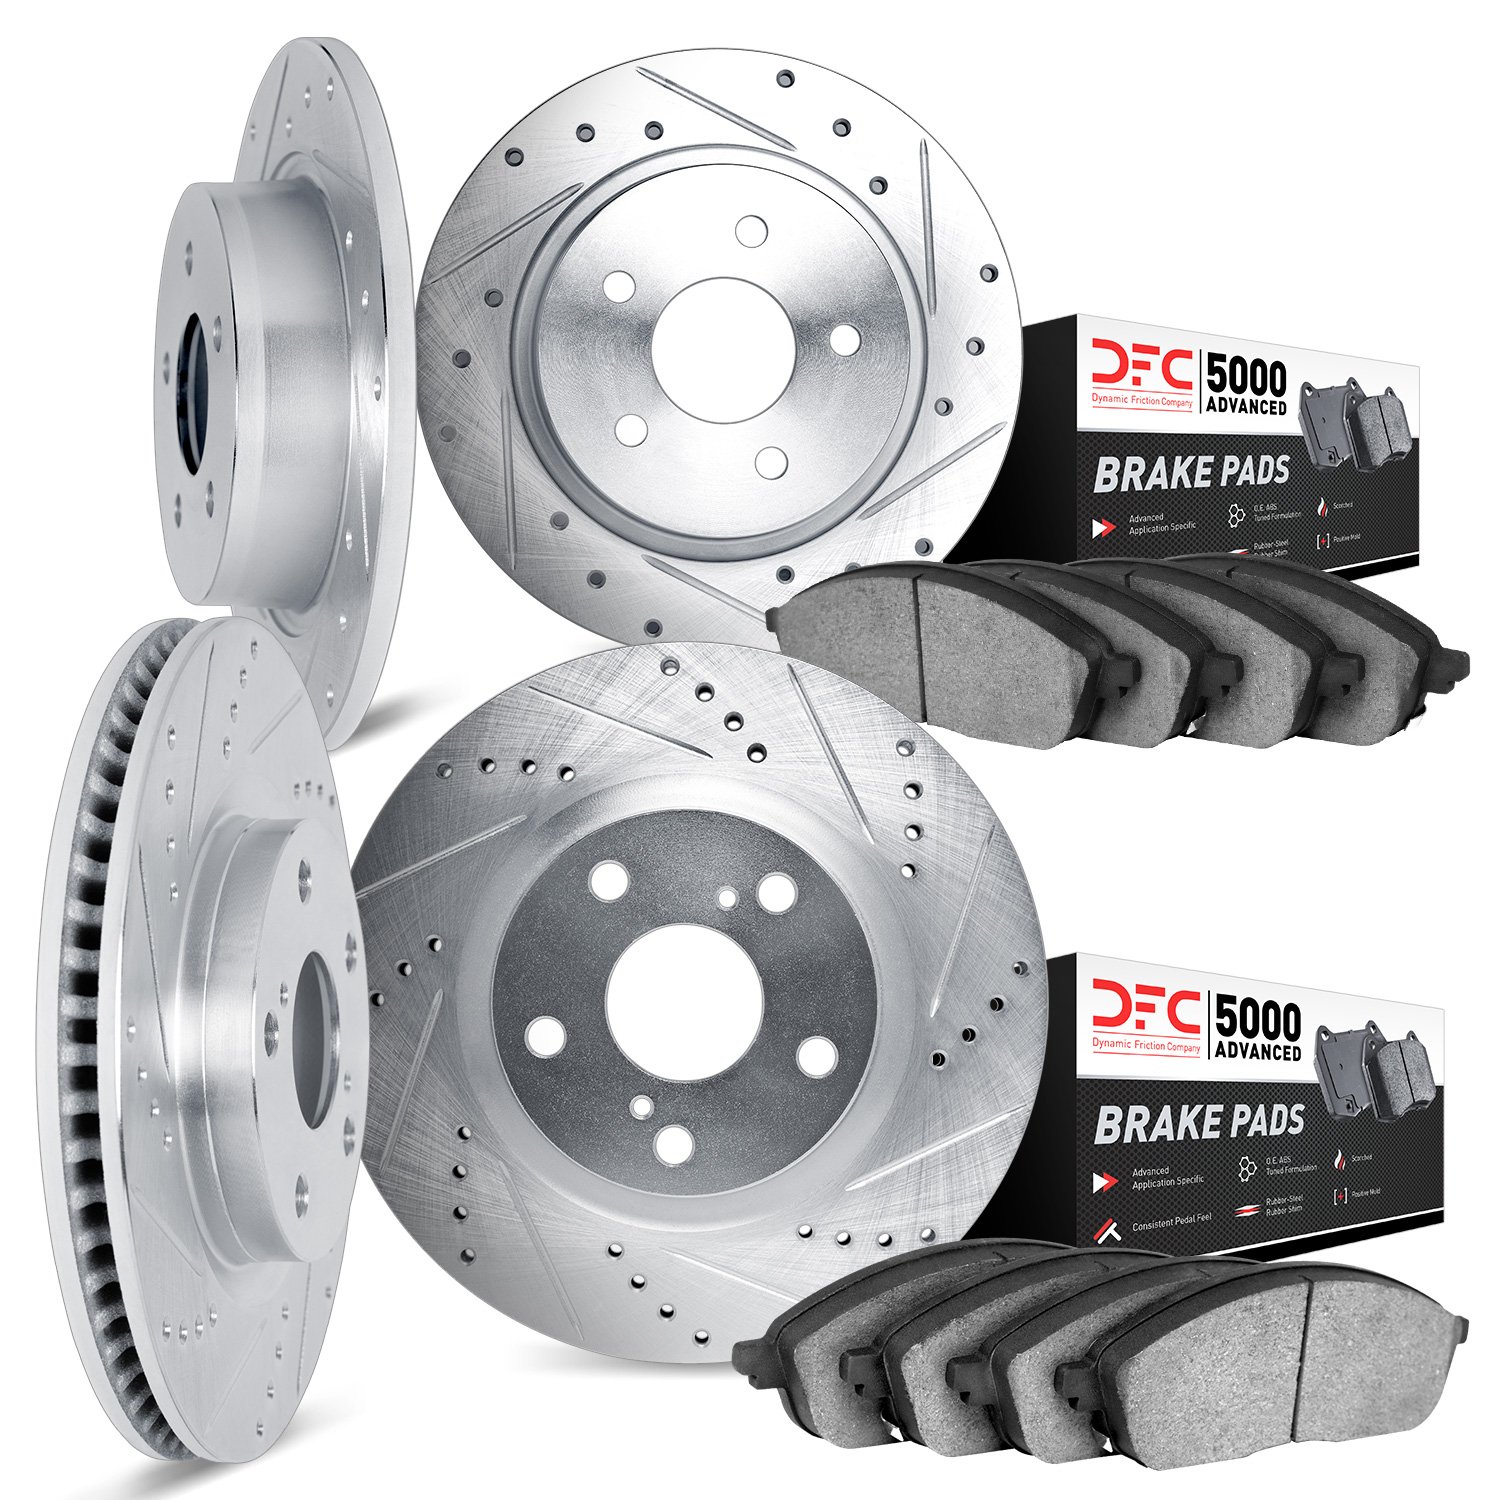 7504-72050 Drilled/Slotted Brake Rotors w/5000 Advanced Brake Pads Kit [Silver], 2009-2015 Mitsubishi, Position: Front and Rear